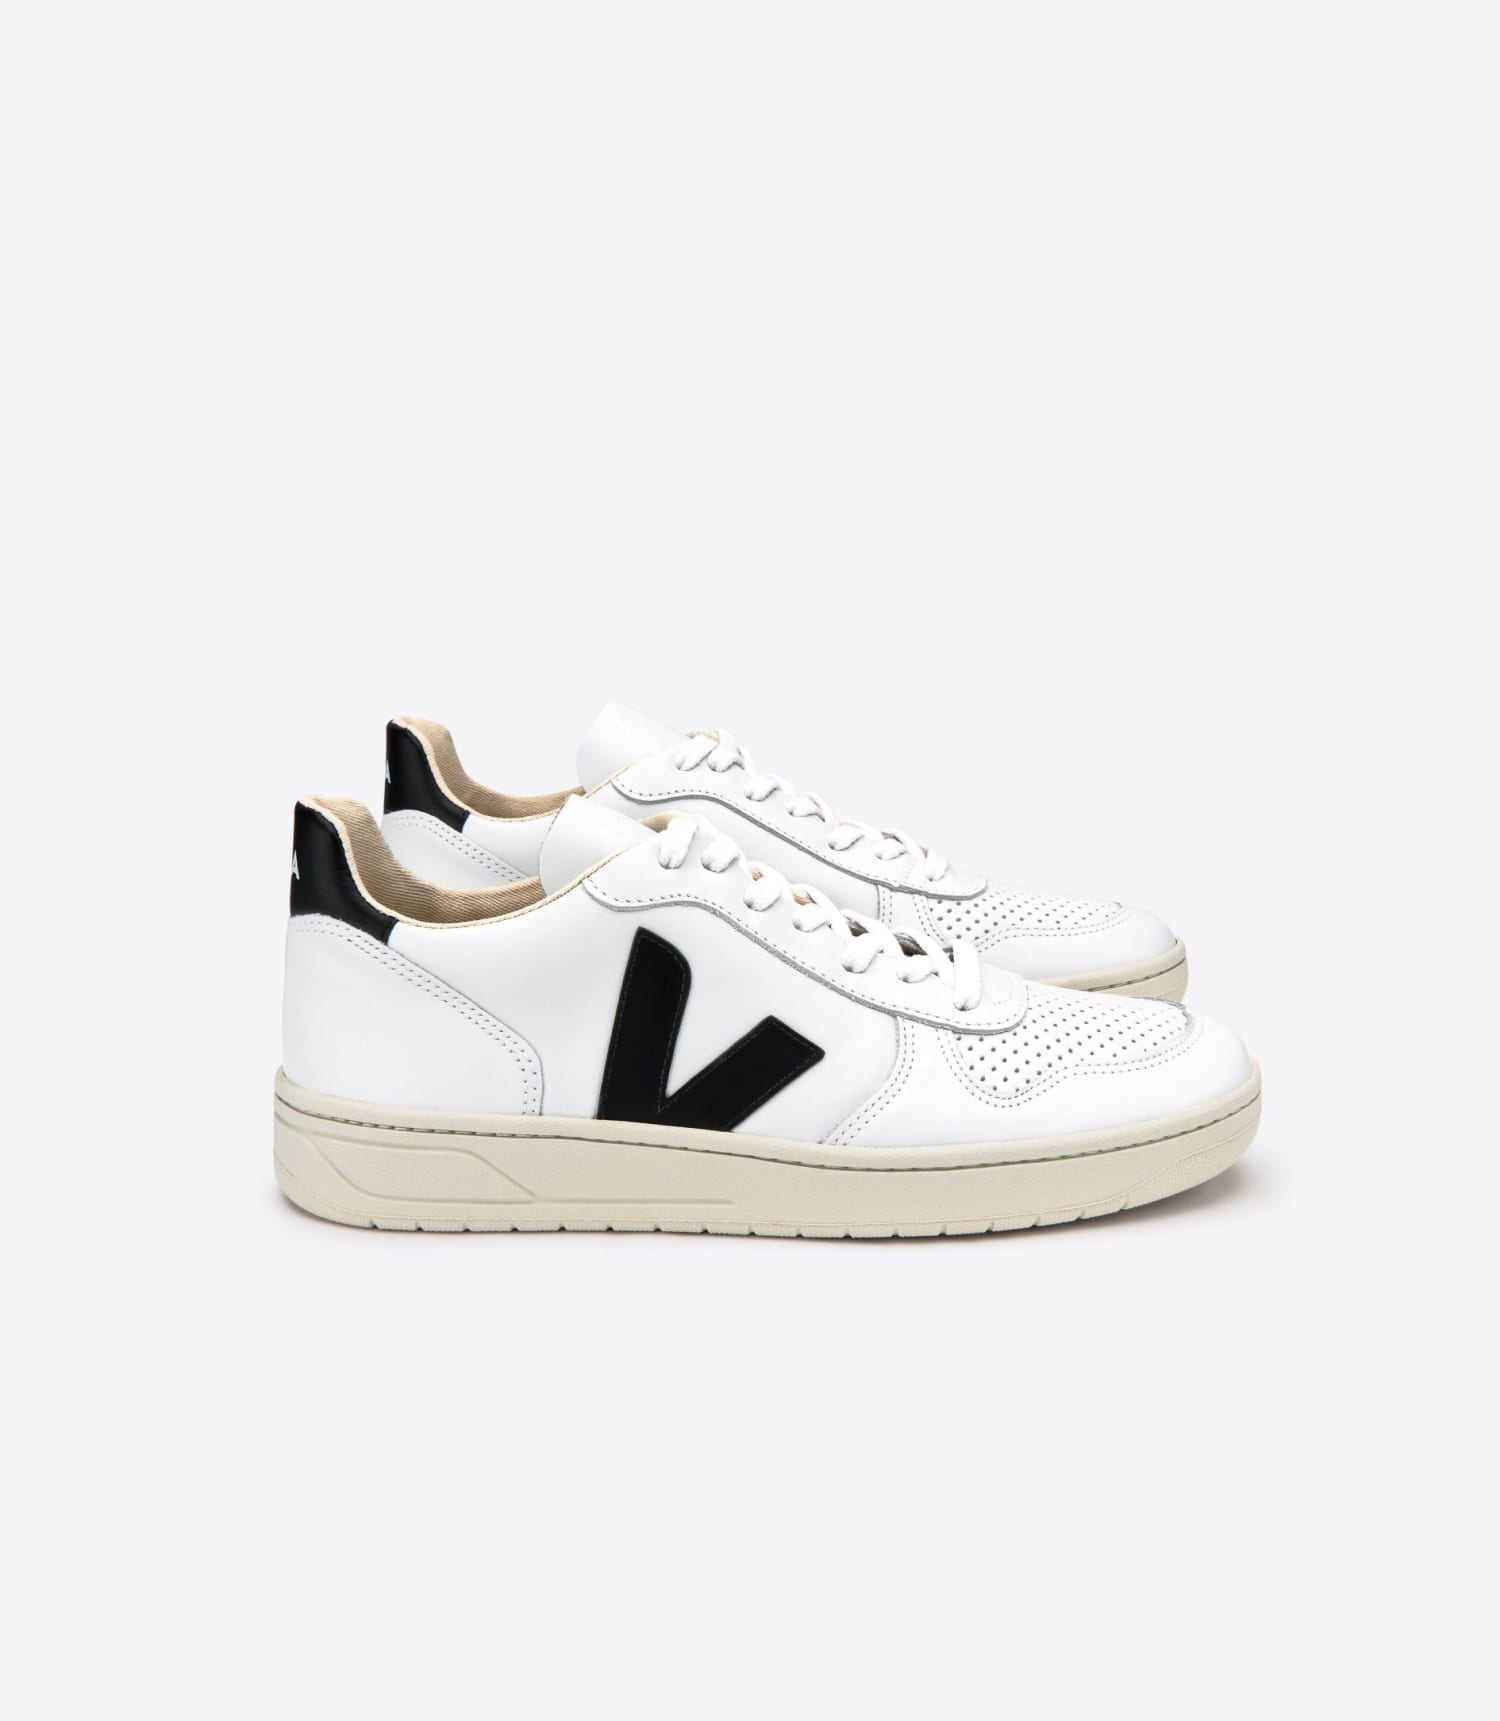 Why the Veja V-10 sneaker is my 